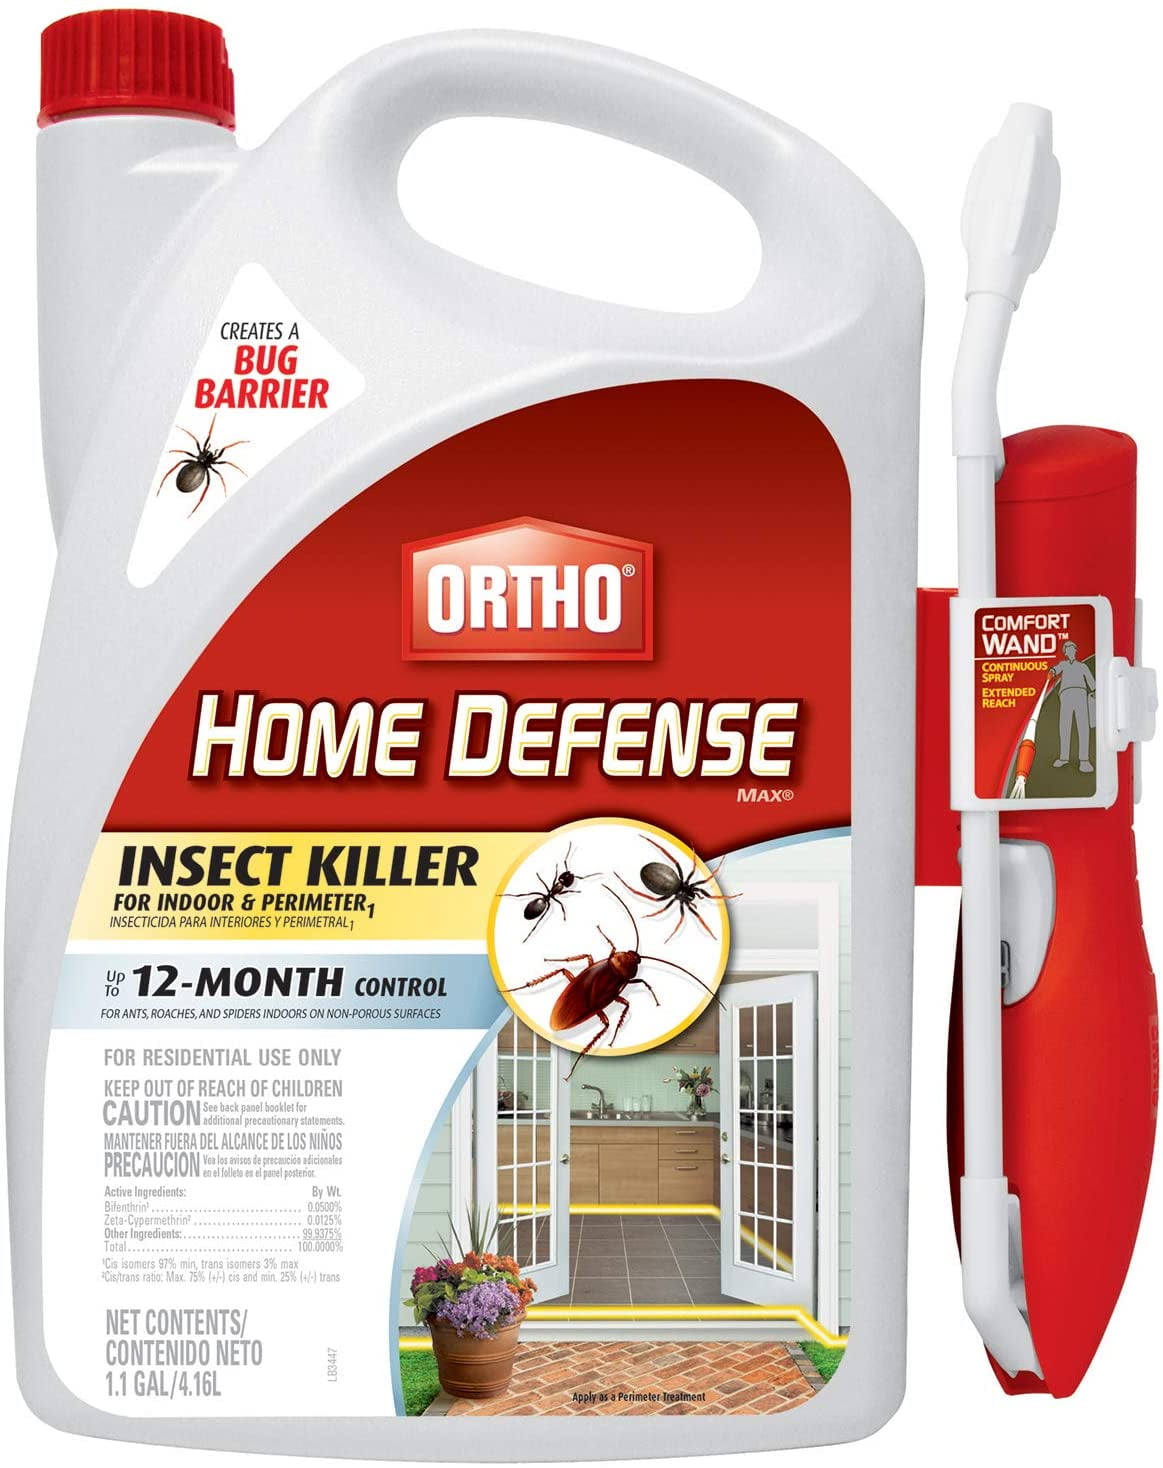 Home Defense MAX Insect Killer for Indoor & Perimeter1 with Comfort Wand - Kills Ants, Cockroaches, Spiders, Fleas, Ticks & Other Listed Bugs, Creates a Bug Barrier, 1.1 gal